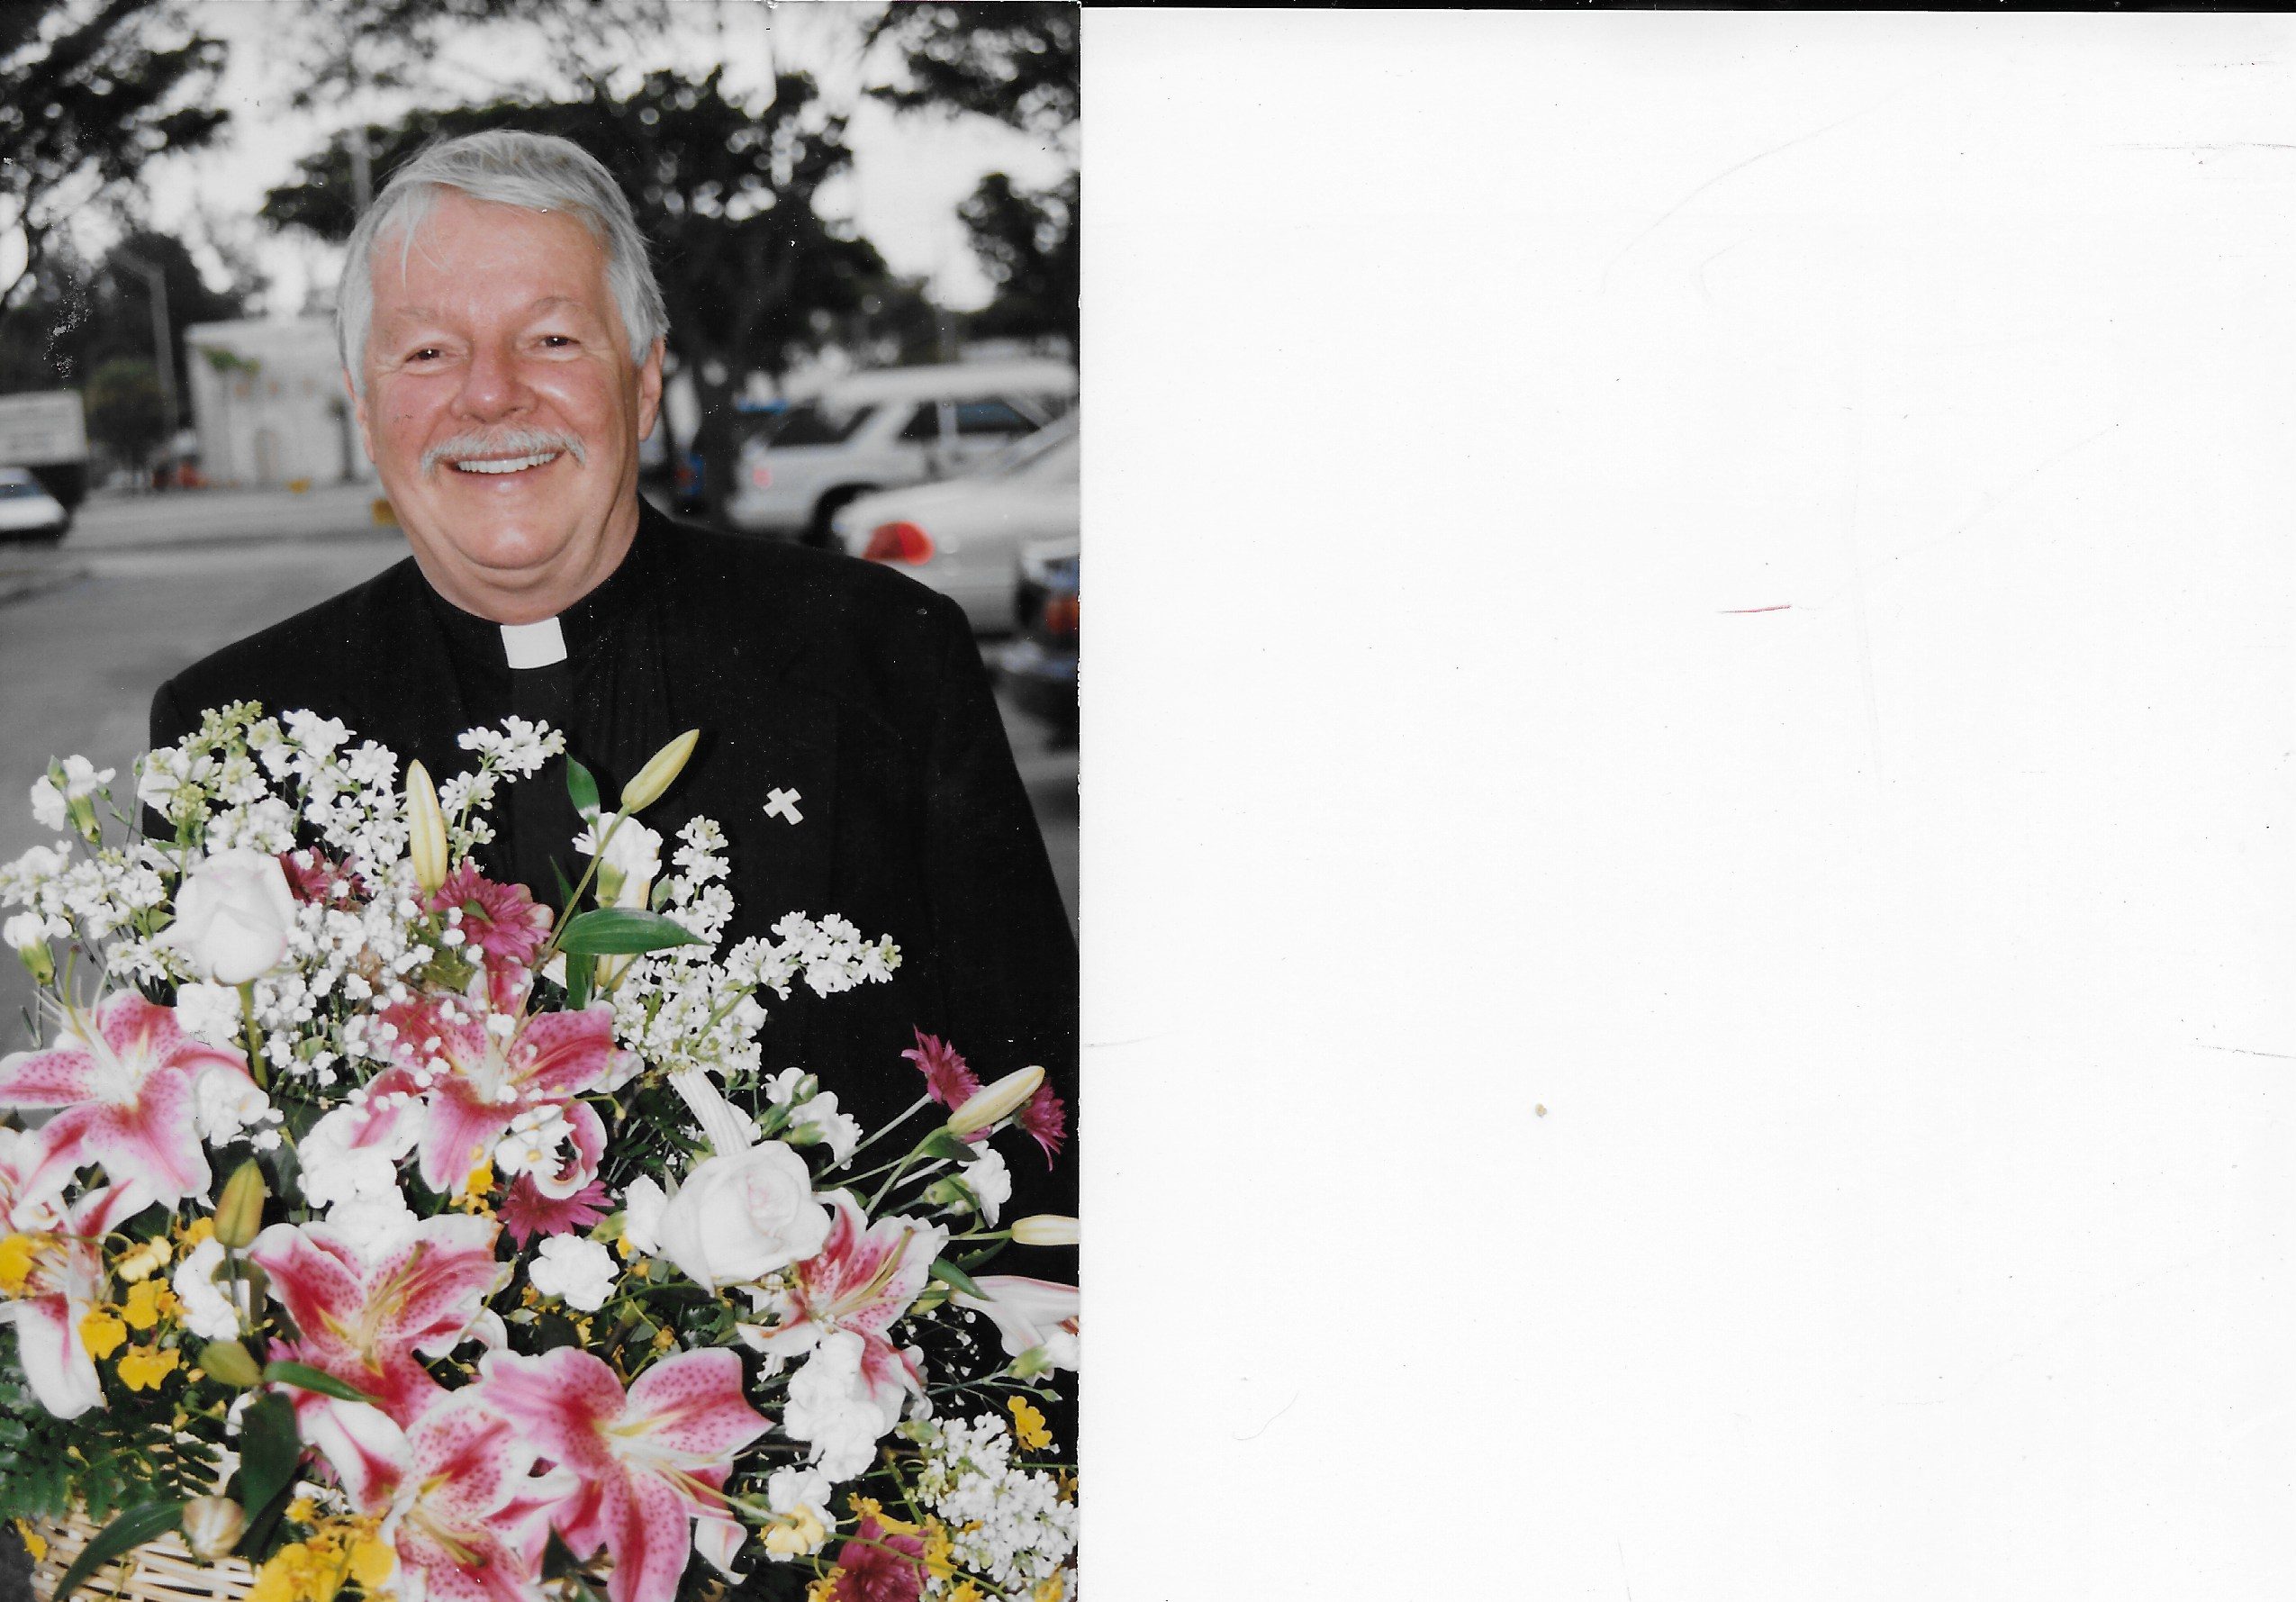 Father John Reid smiles broadly, as he holds a bountiful bouquet of beautiful flowers at the Divine Mercy Chapel in Wilton Manors FL.